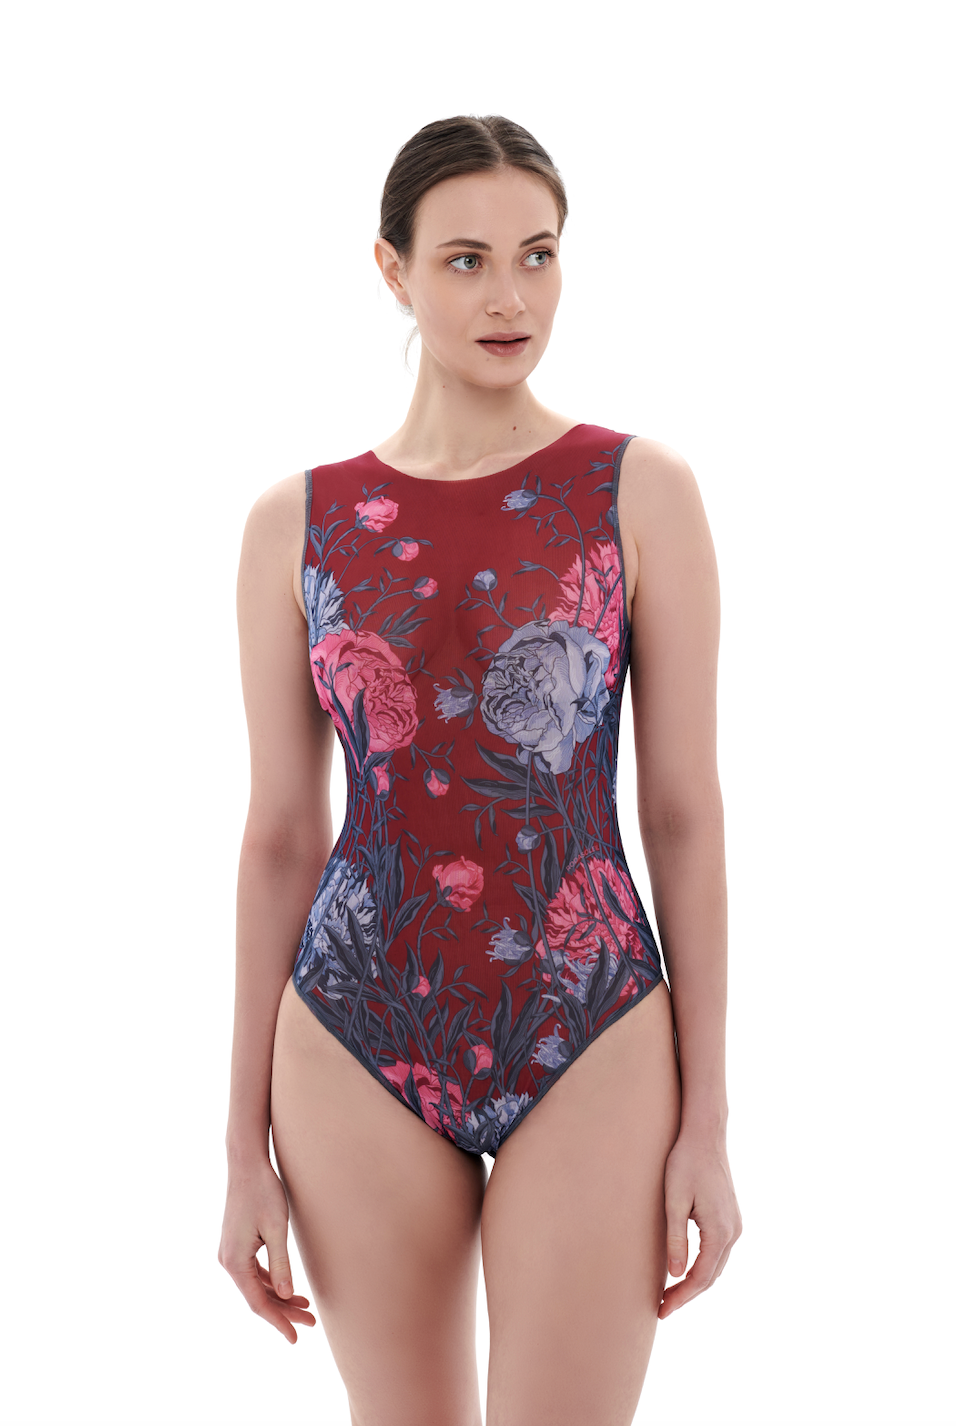  Discover sustainable tan-through smart swimsuits in this file, showcasing a stylish peonies print. Included is a sleeveless one-piece offering luxurious sun protection and a perfect silhouette.